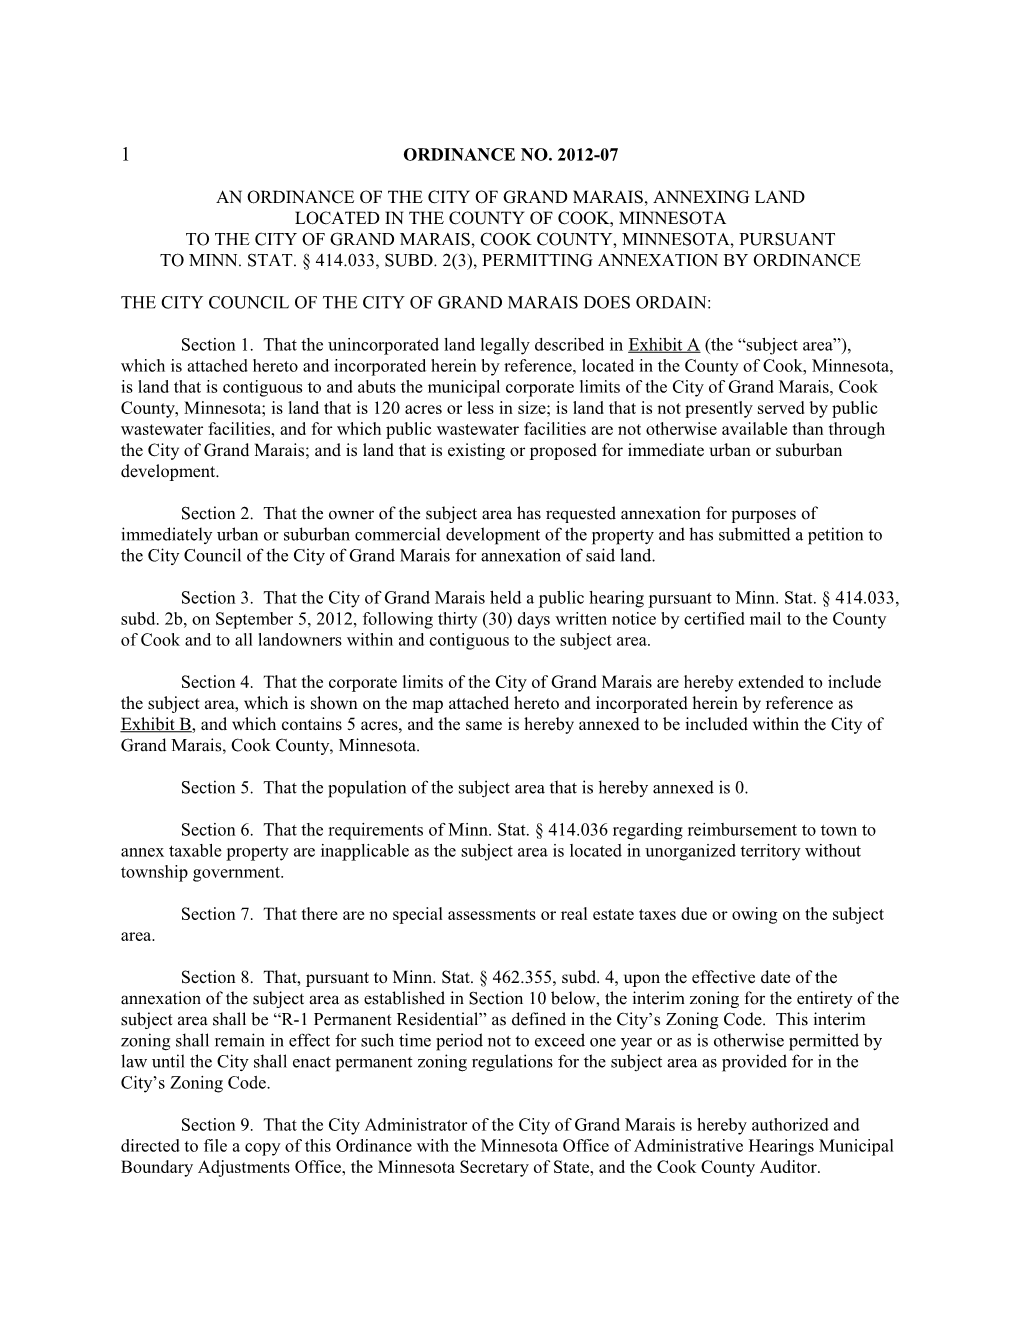 An Ordinance of the City of Grand Marais, Annexing Land